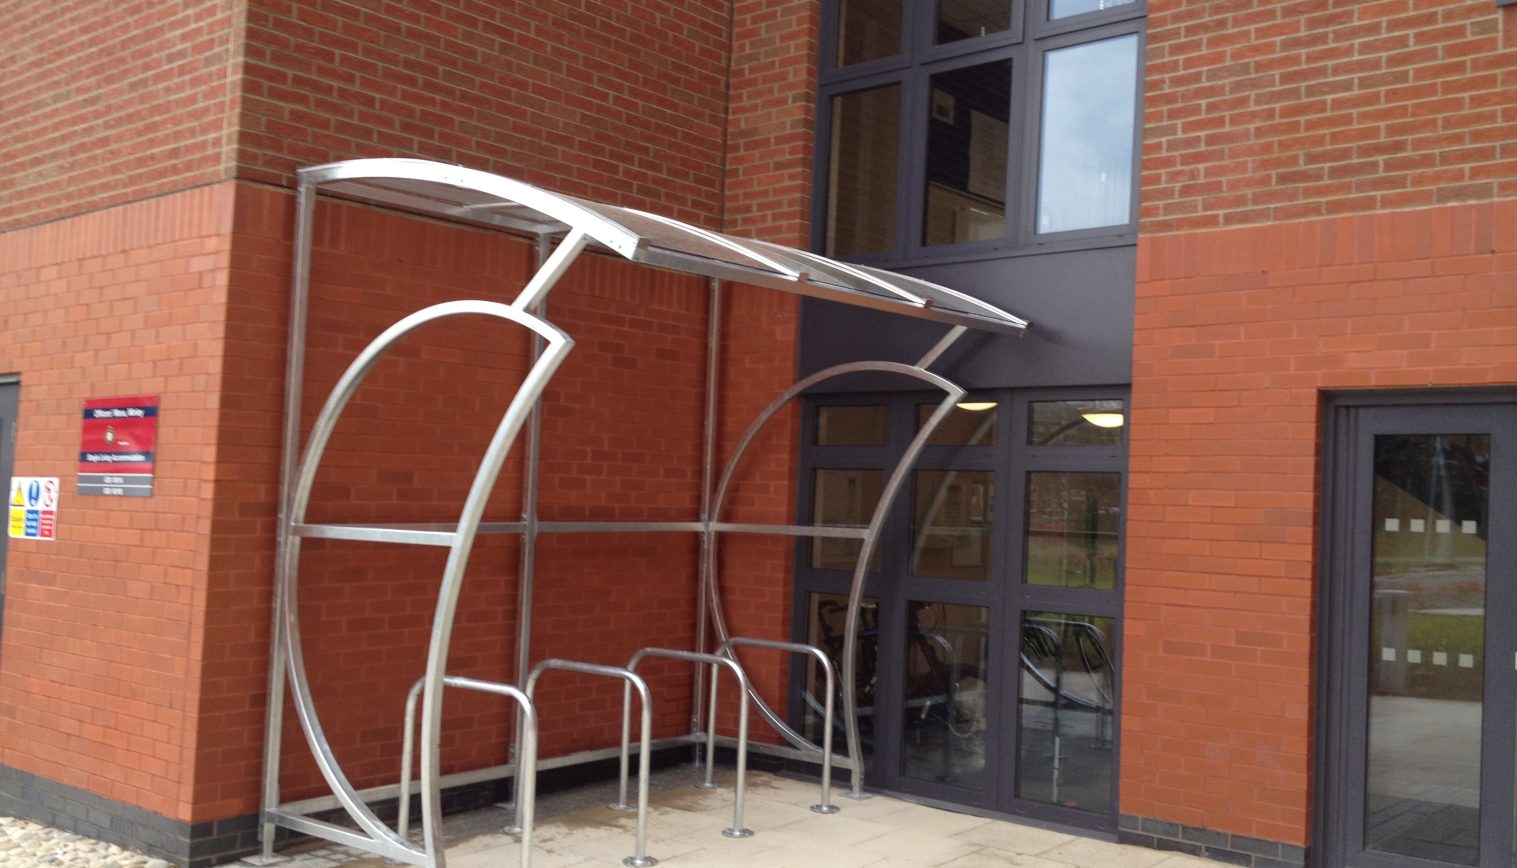 Royal School Of Military Engineering – Cycle Shelters And Compounds